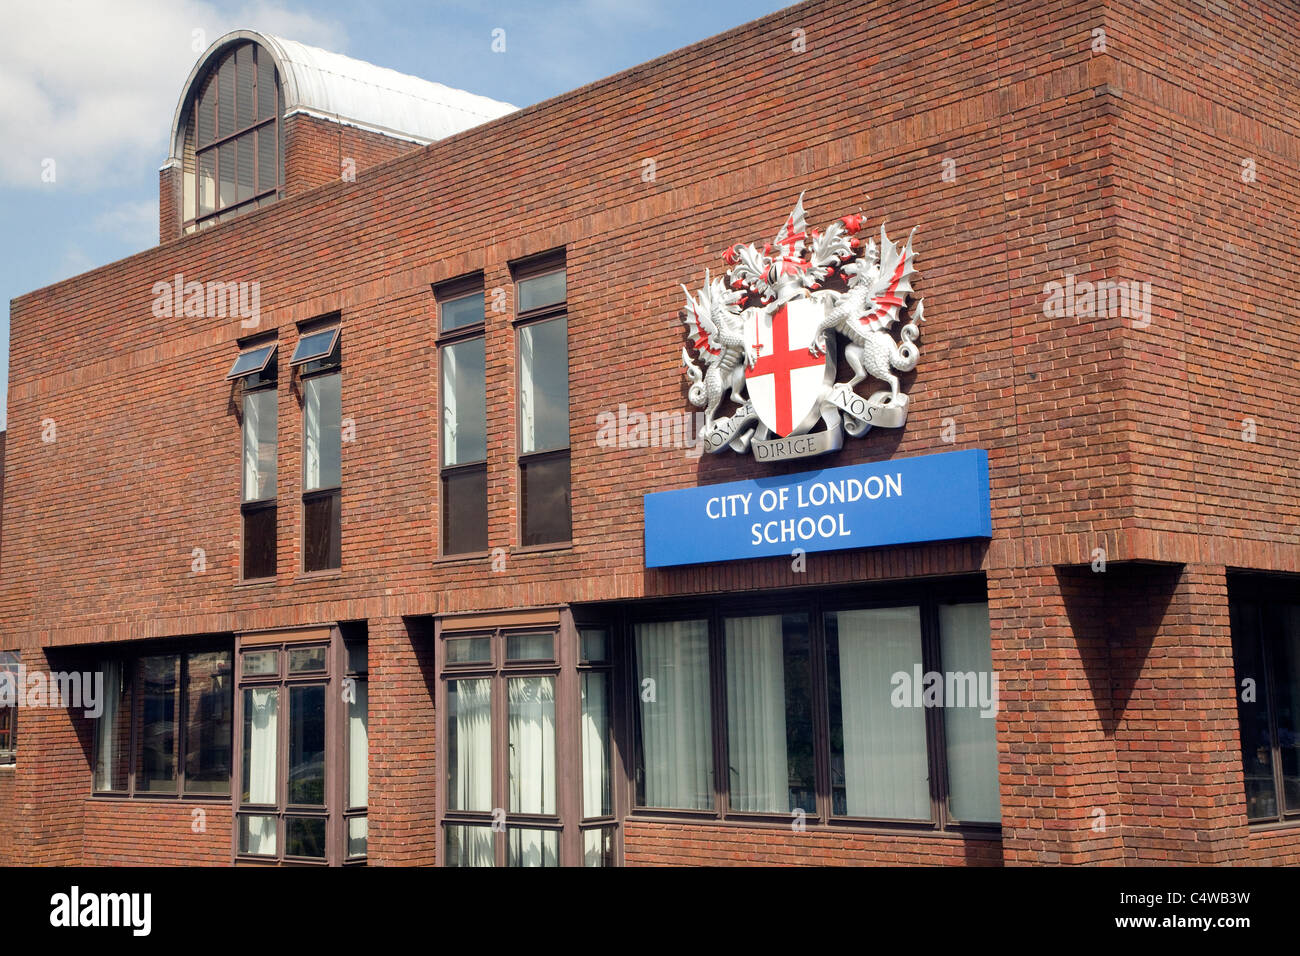 City of London School building and crest, London Stock Photo